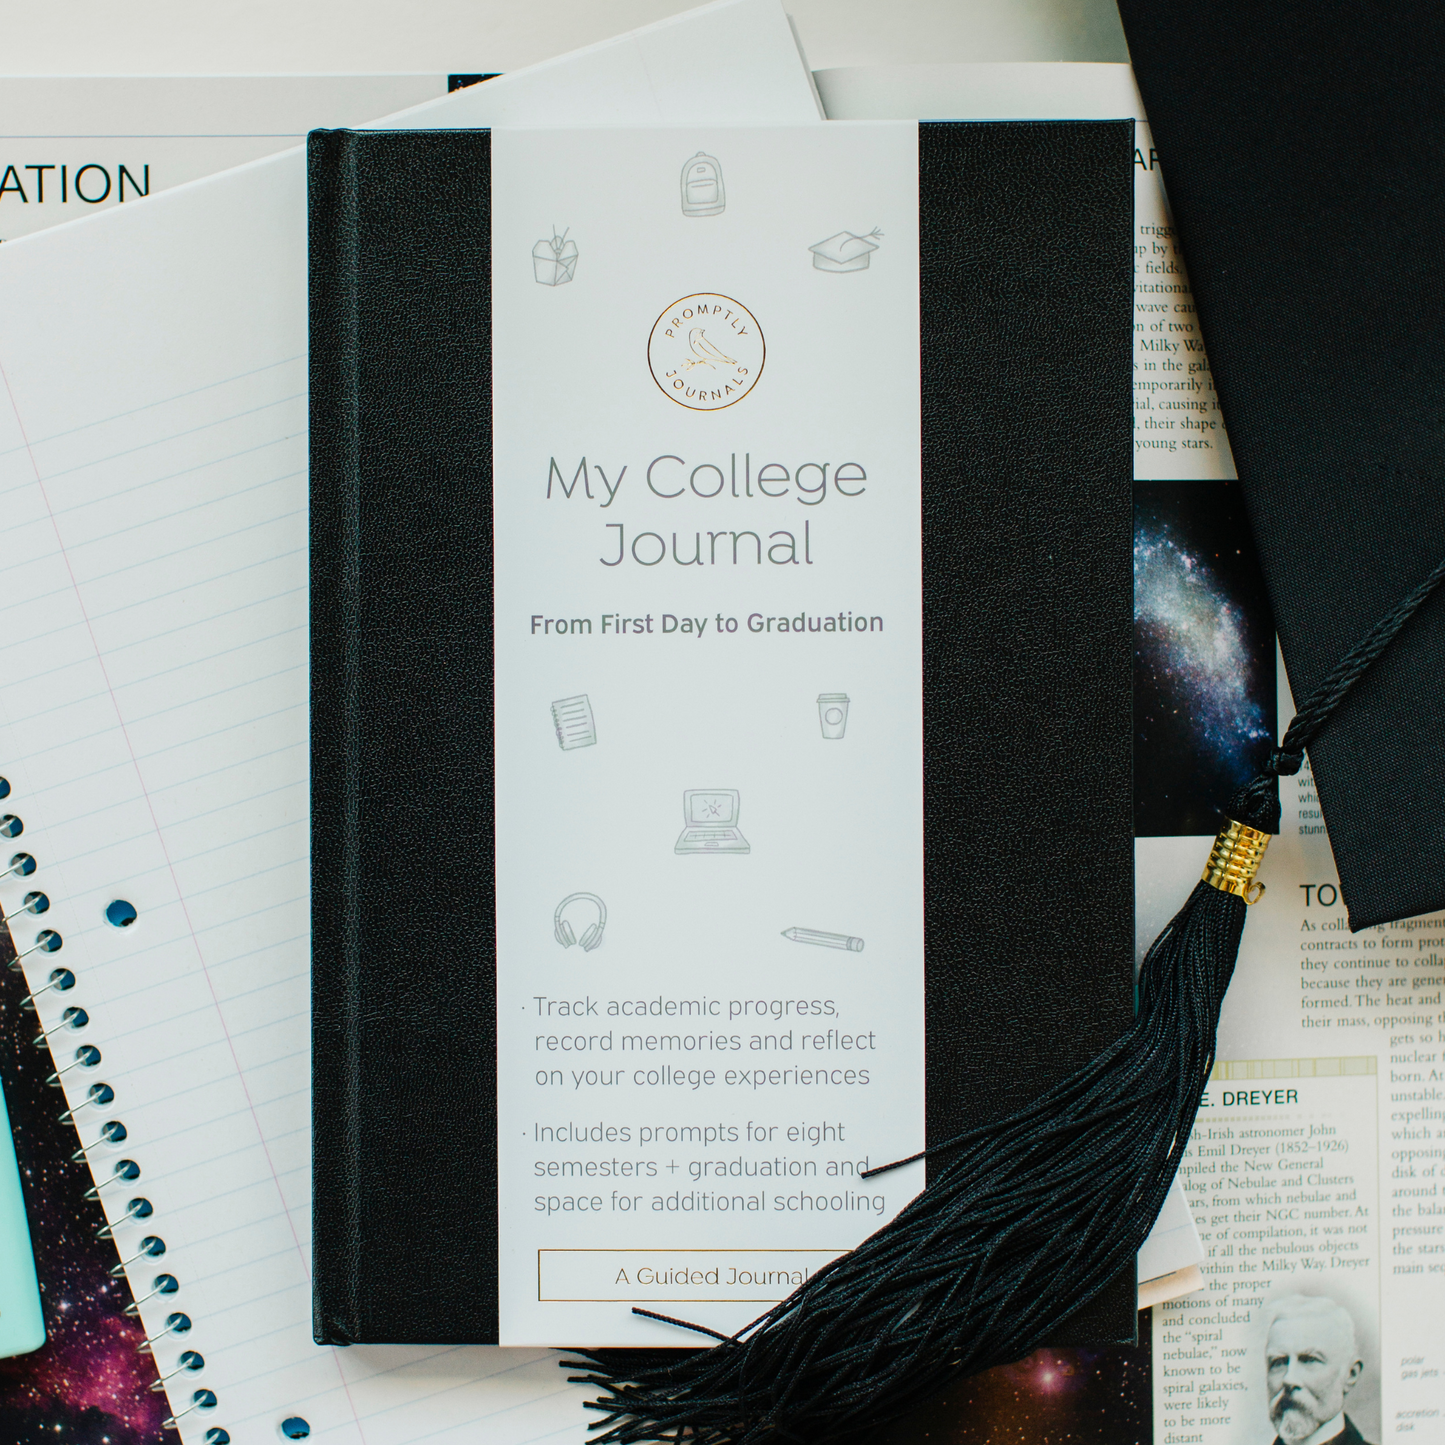 My College Journal: From First Day to Graduation (Onyx) by Promptly Journals